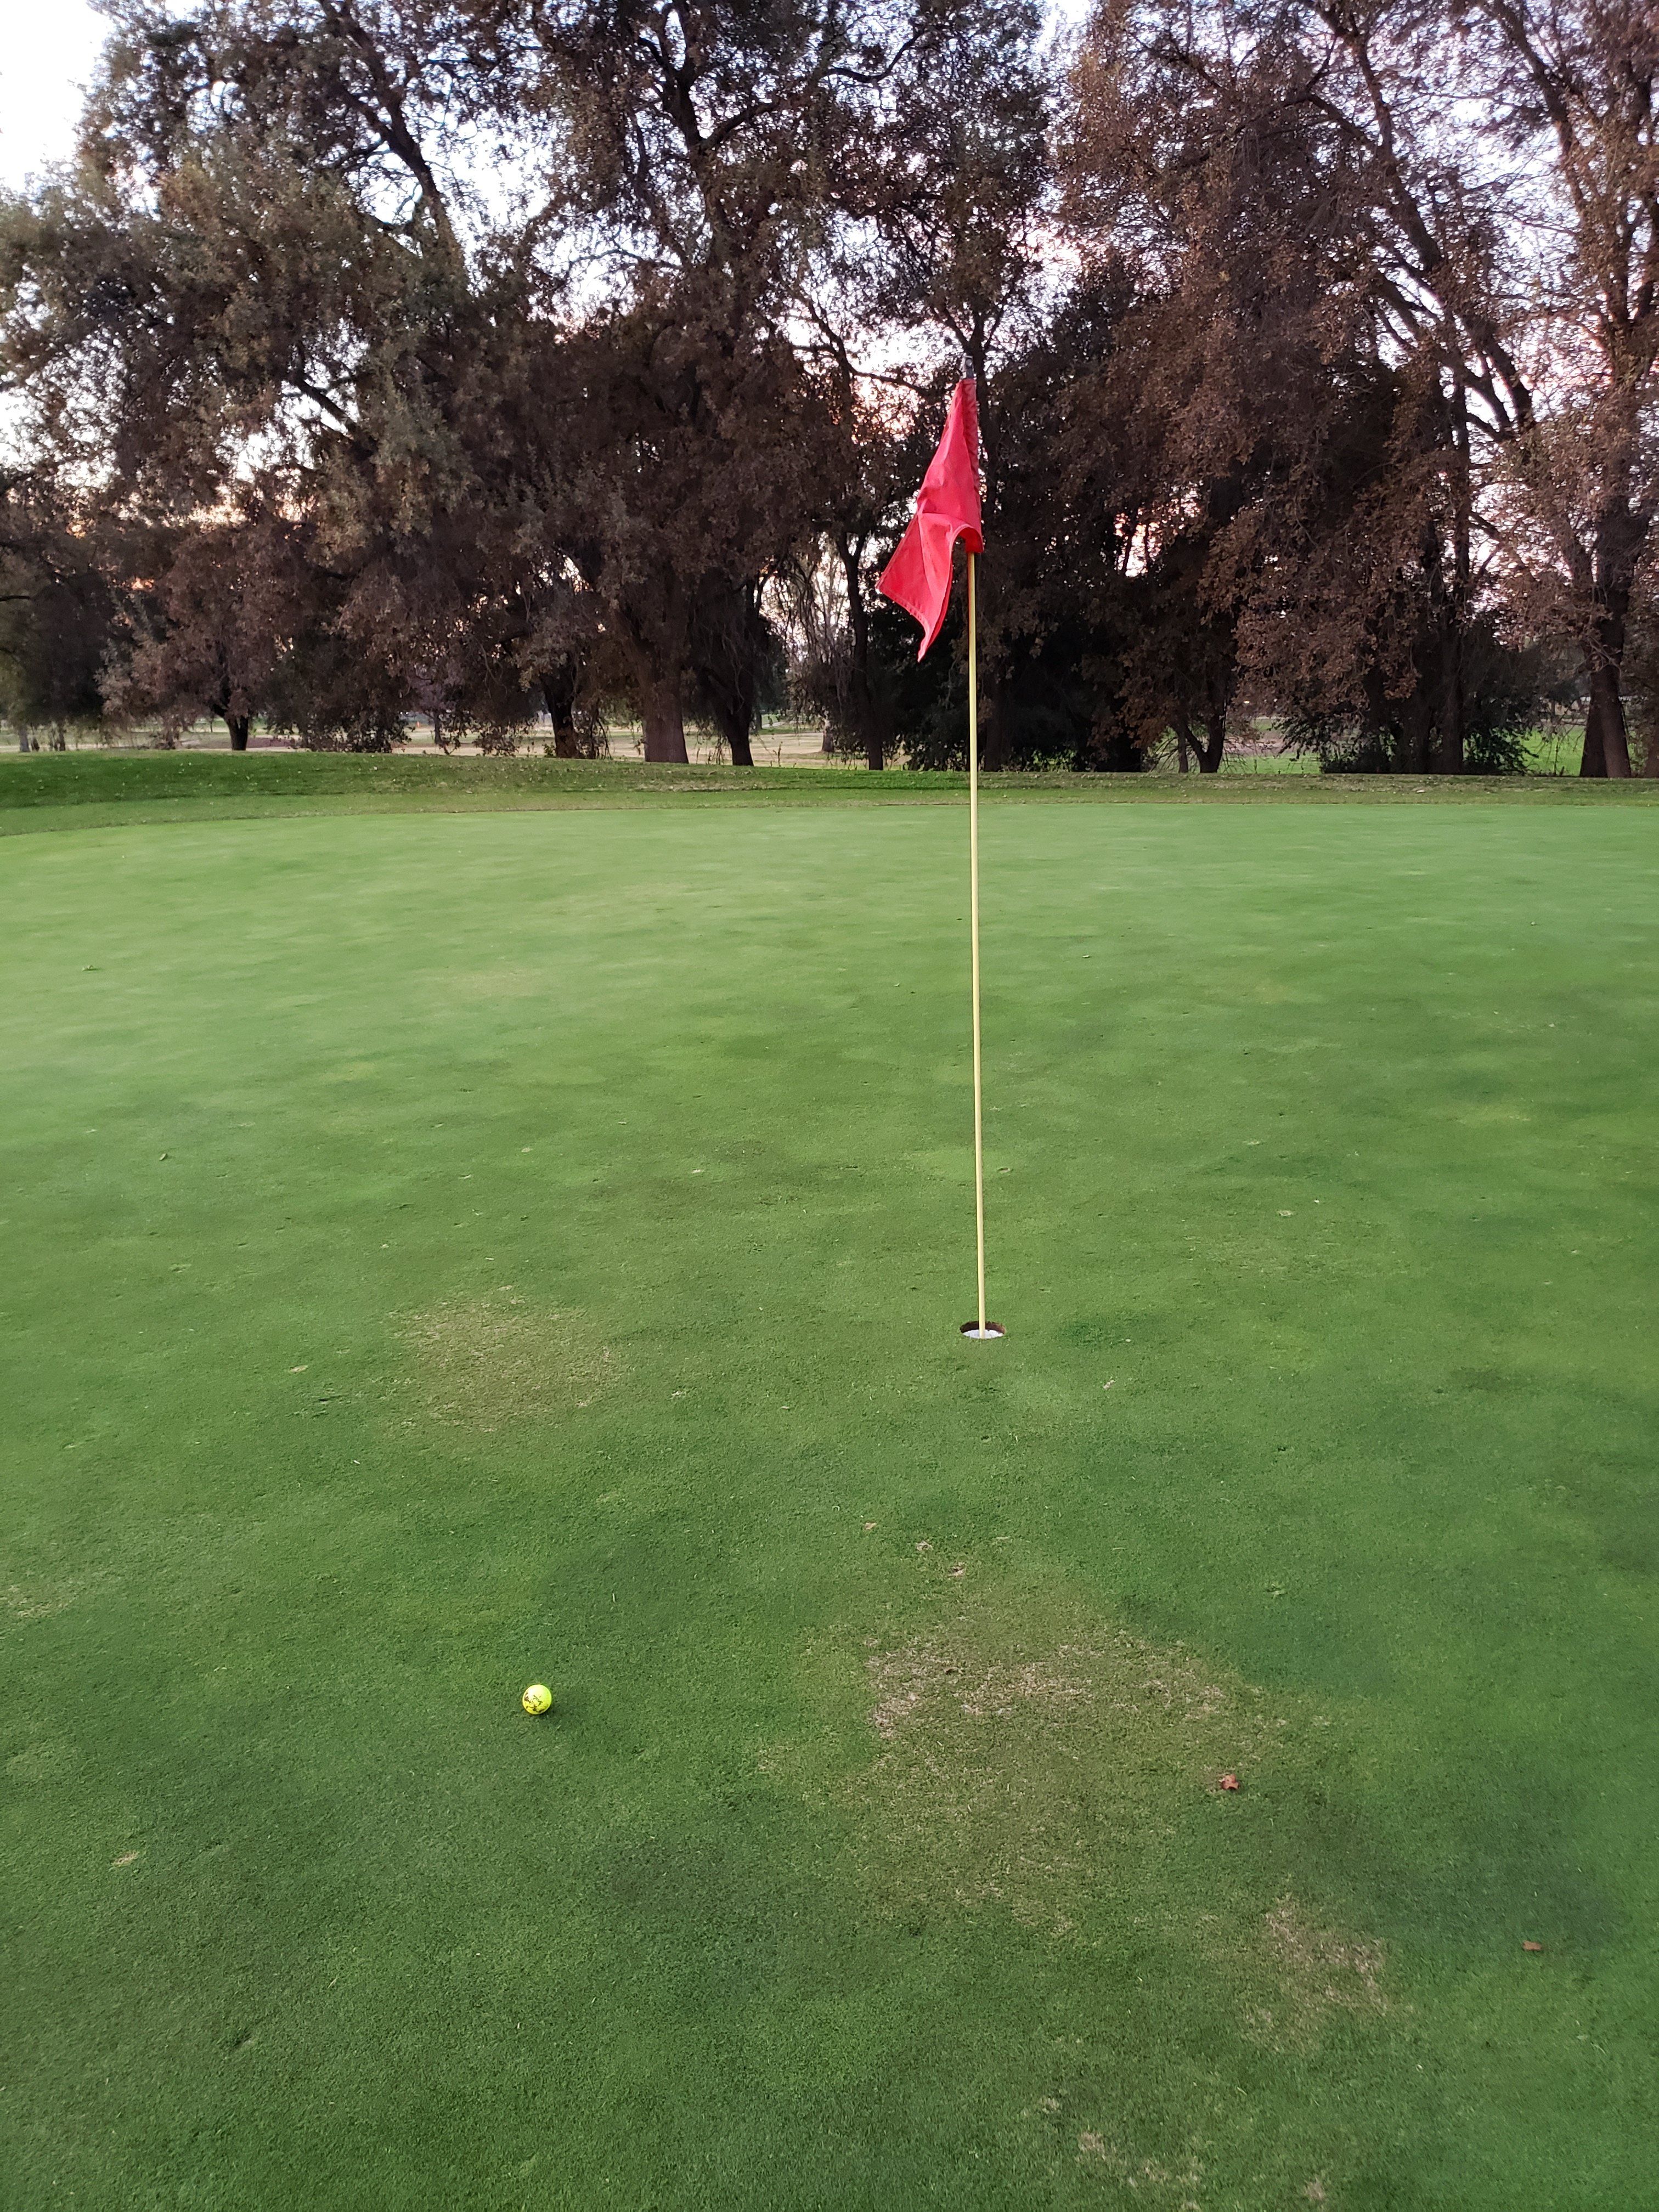 On in two... And made the birdie putt